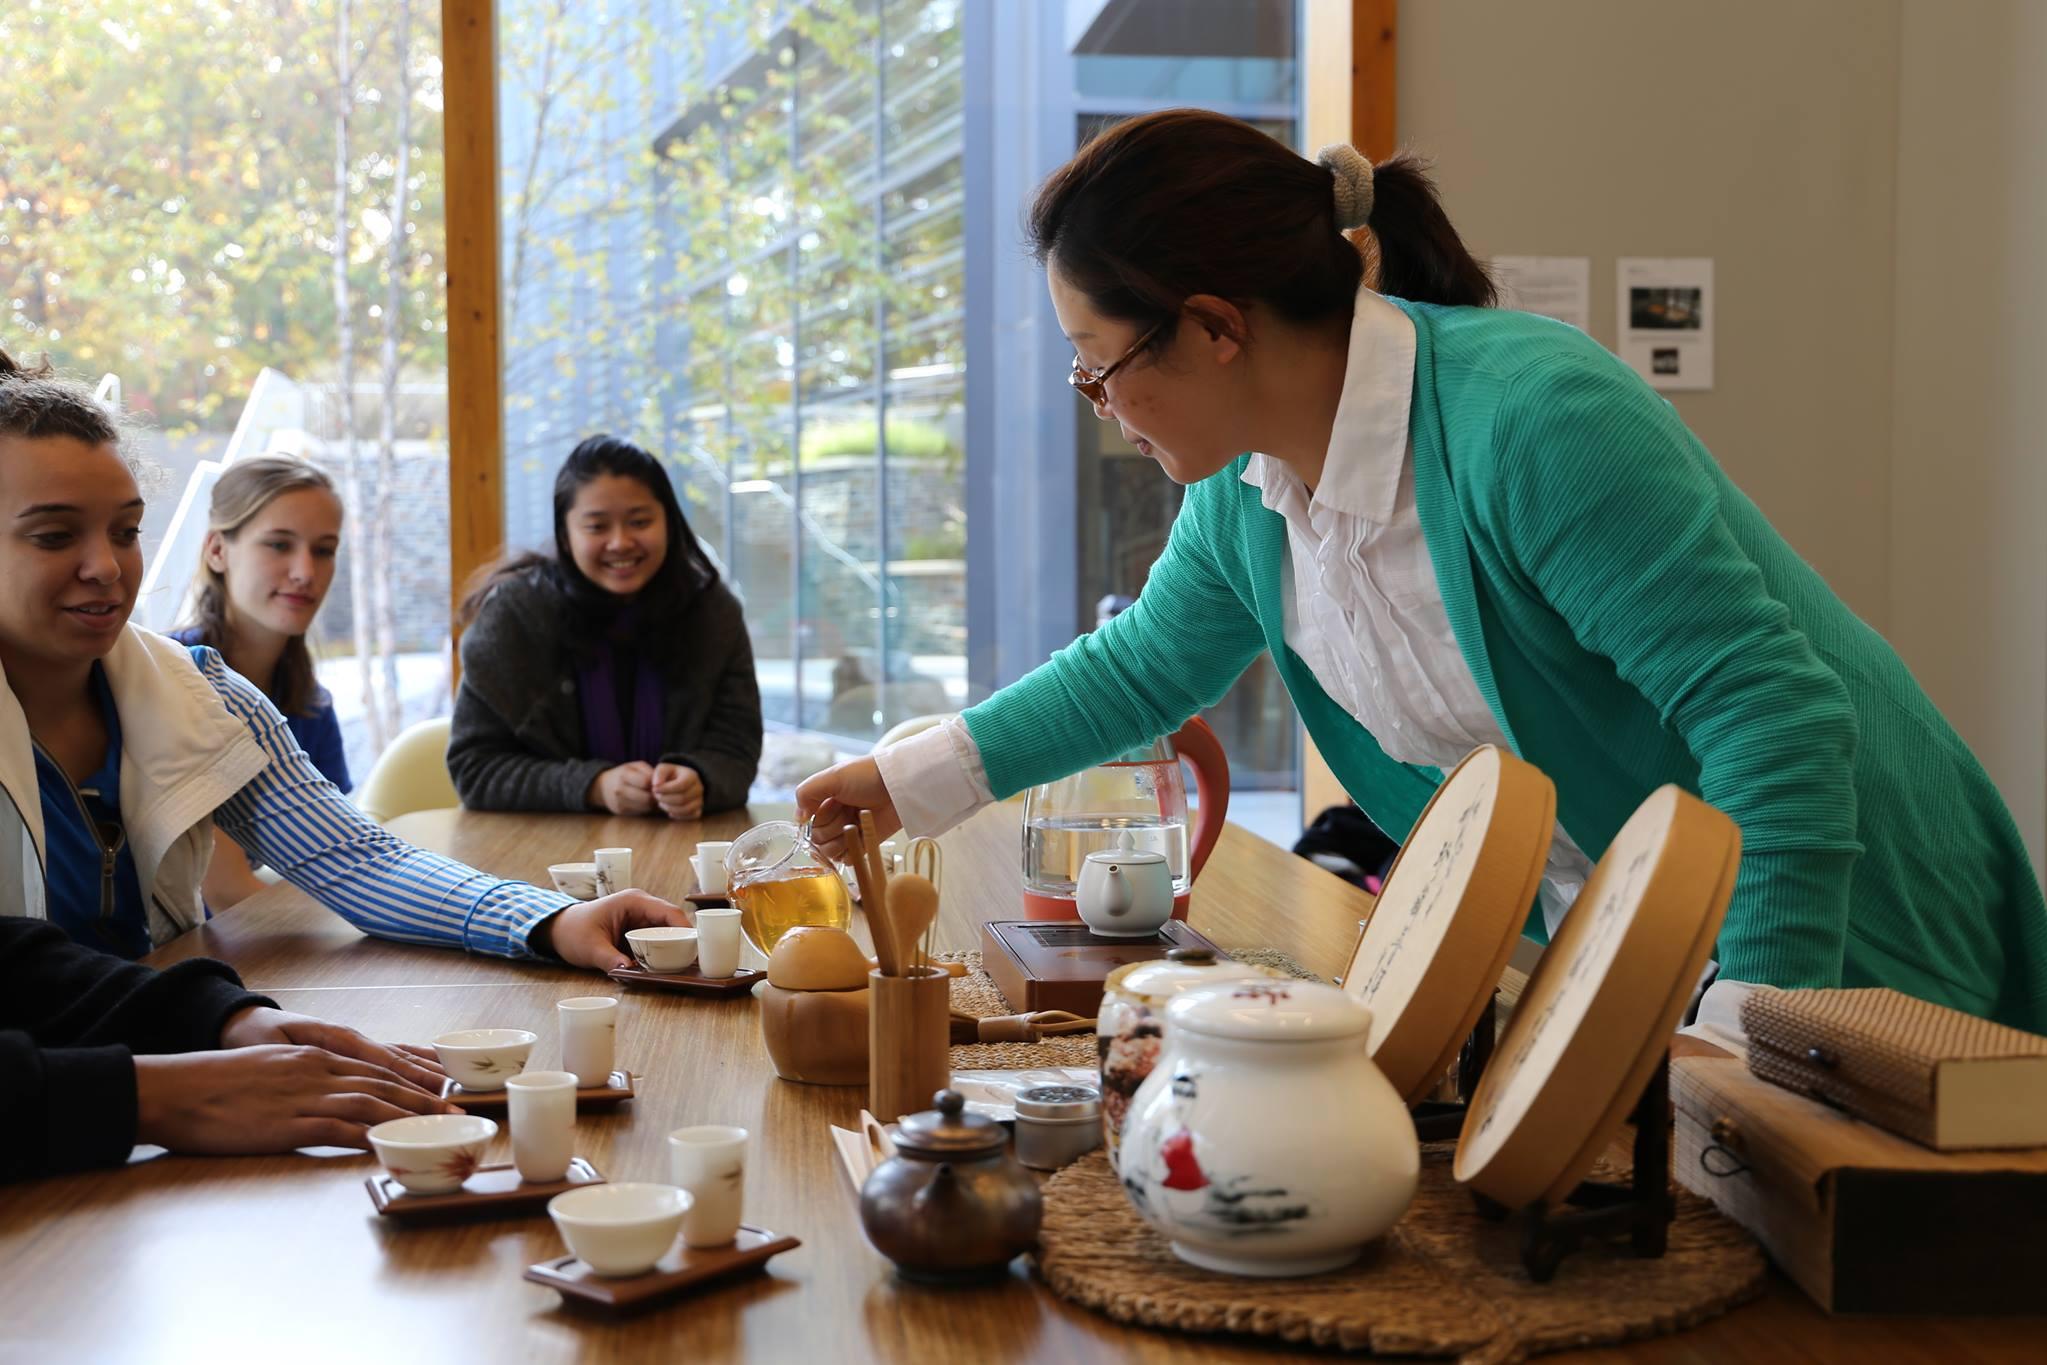 In partnership with Duke CommuniTEA, this wellness experience allows you to gain a deeper understanding of wellness through tea culture.   You will have the opportunity to interact through the medium of tea appreciation in a space that promotes relaxation and self-care.  This group meets every Sunday &amp;amp;amp; Thursday from 5:00pm - 5:50pm in Oasis West, Room 128 in the Student Wellness Center.